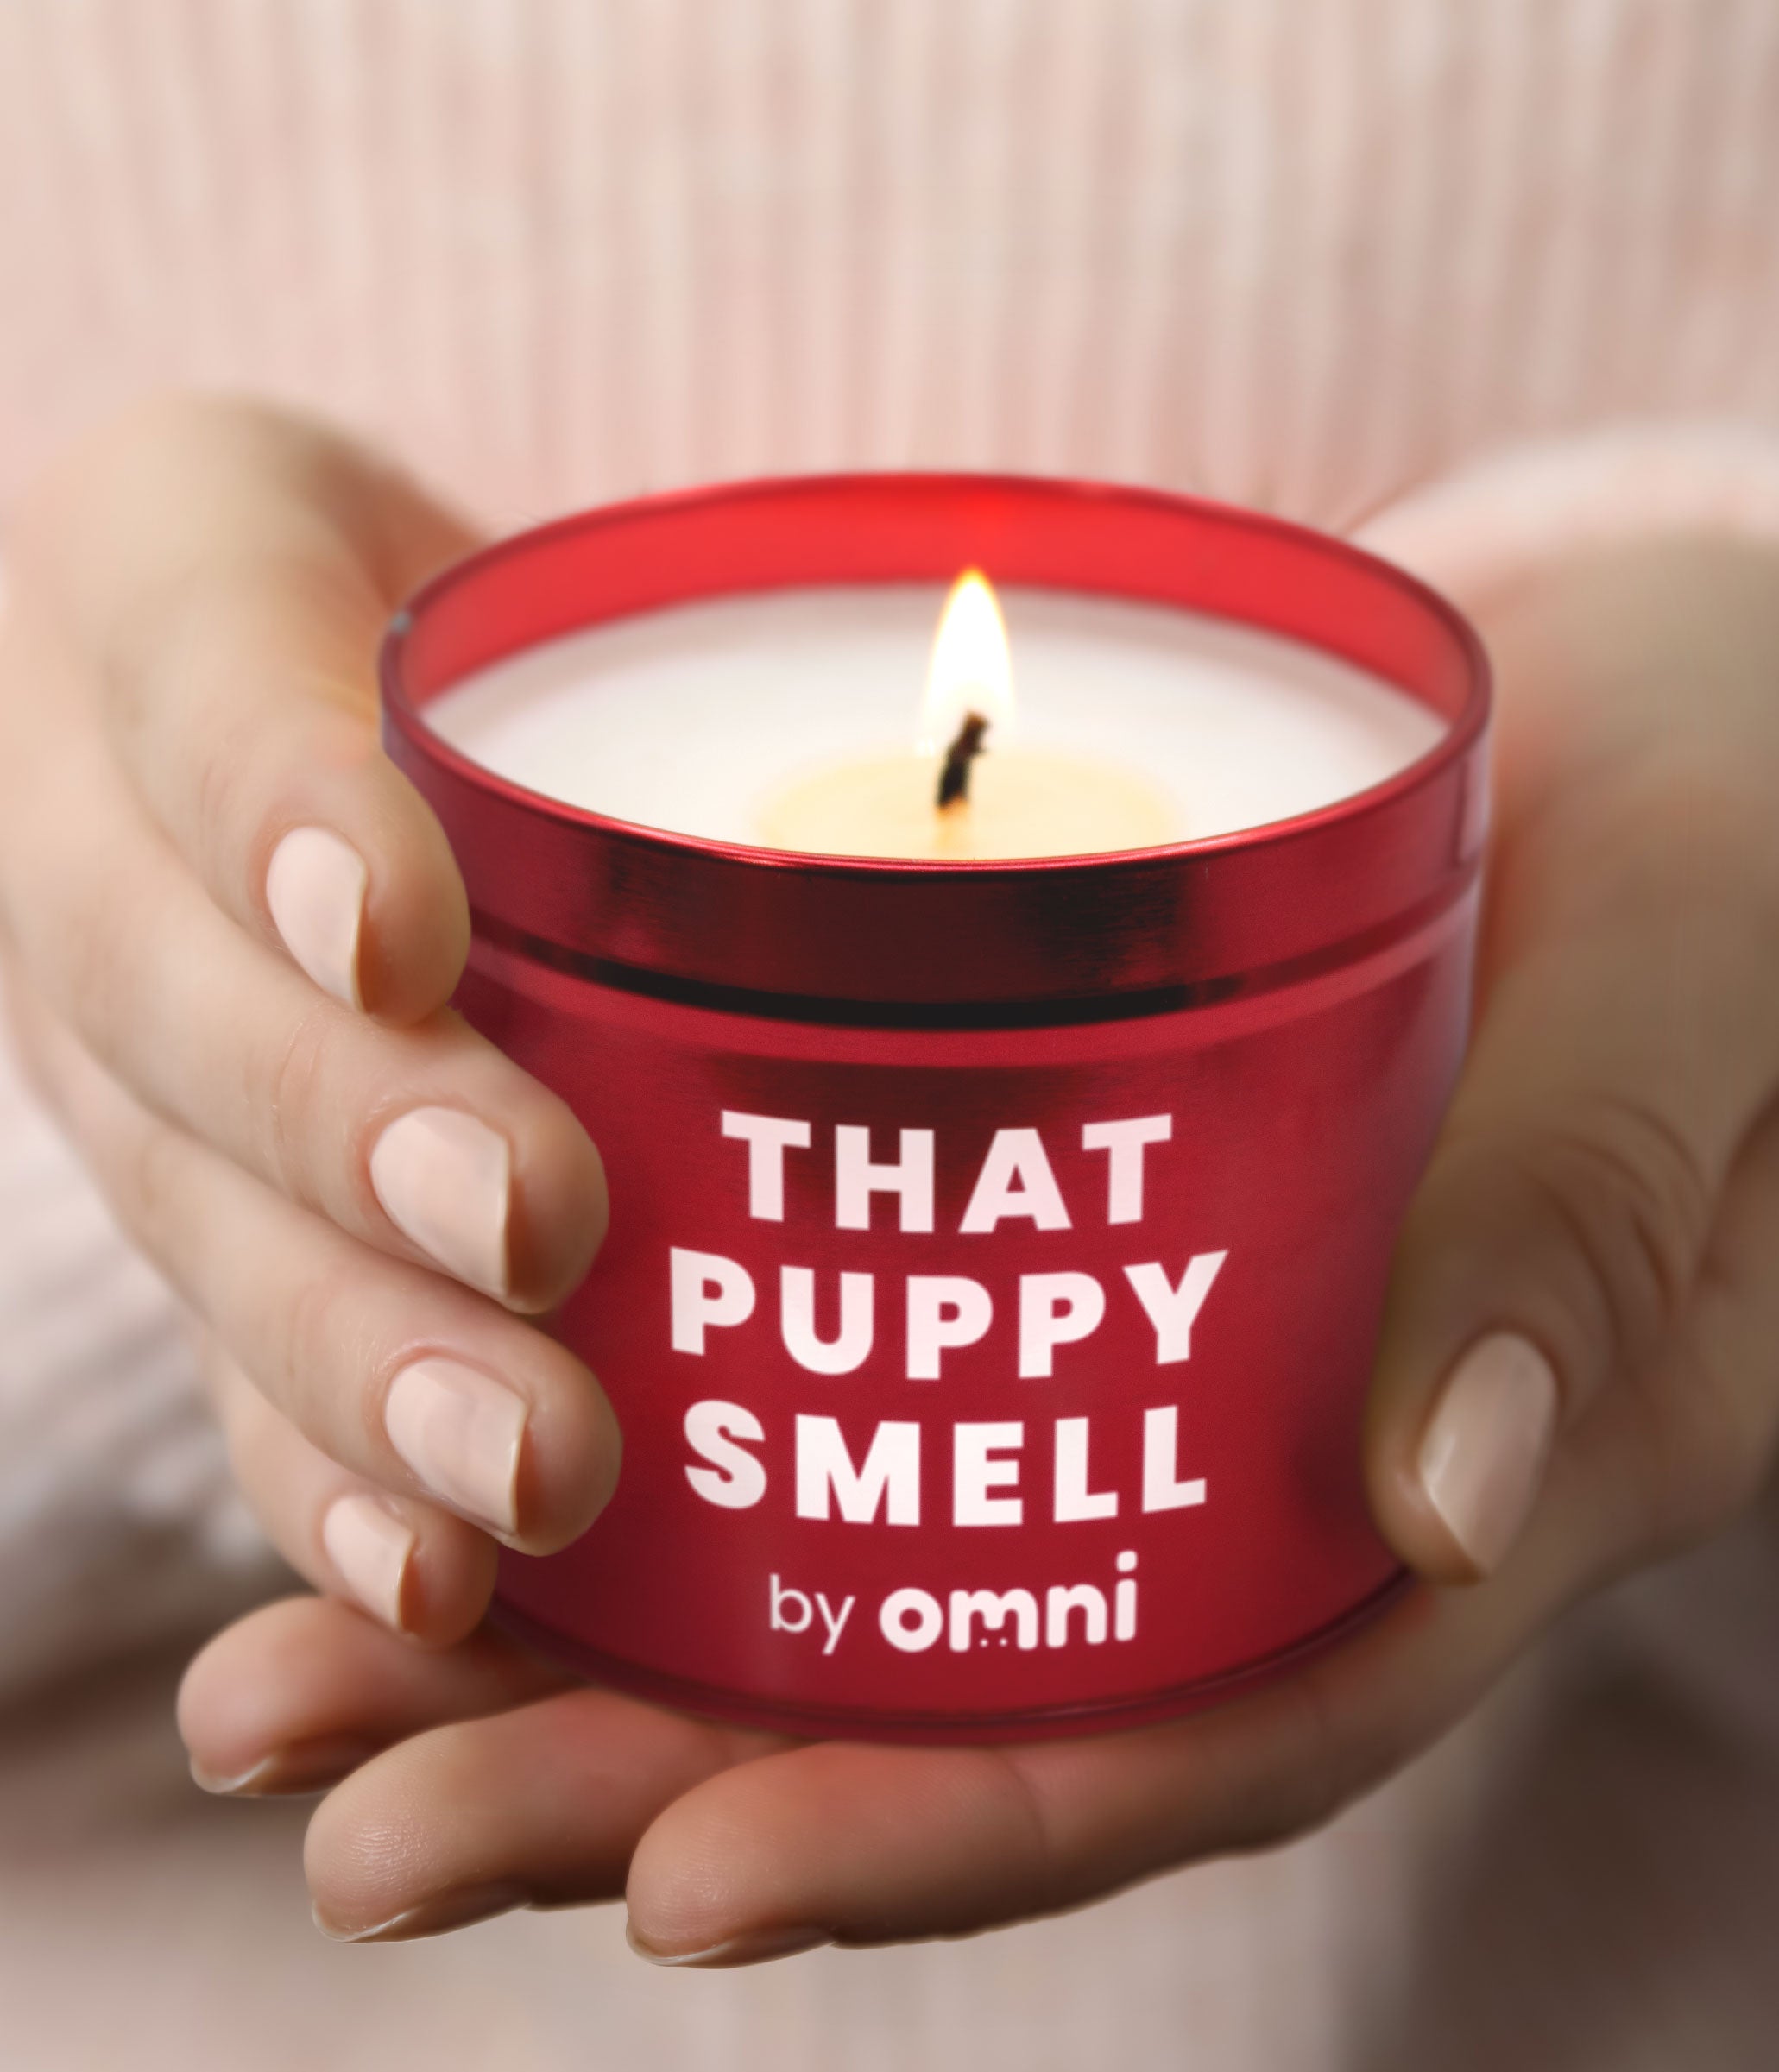 The 'That Puppy Smell' Candle